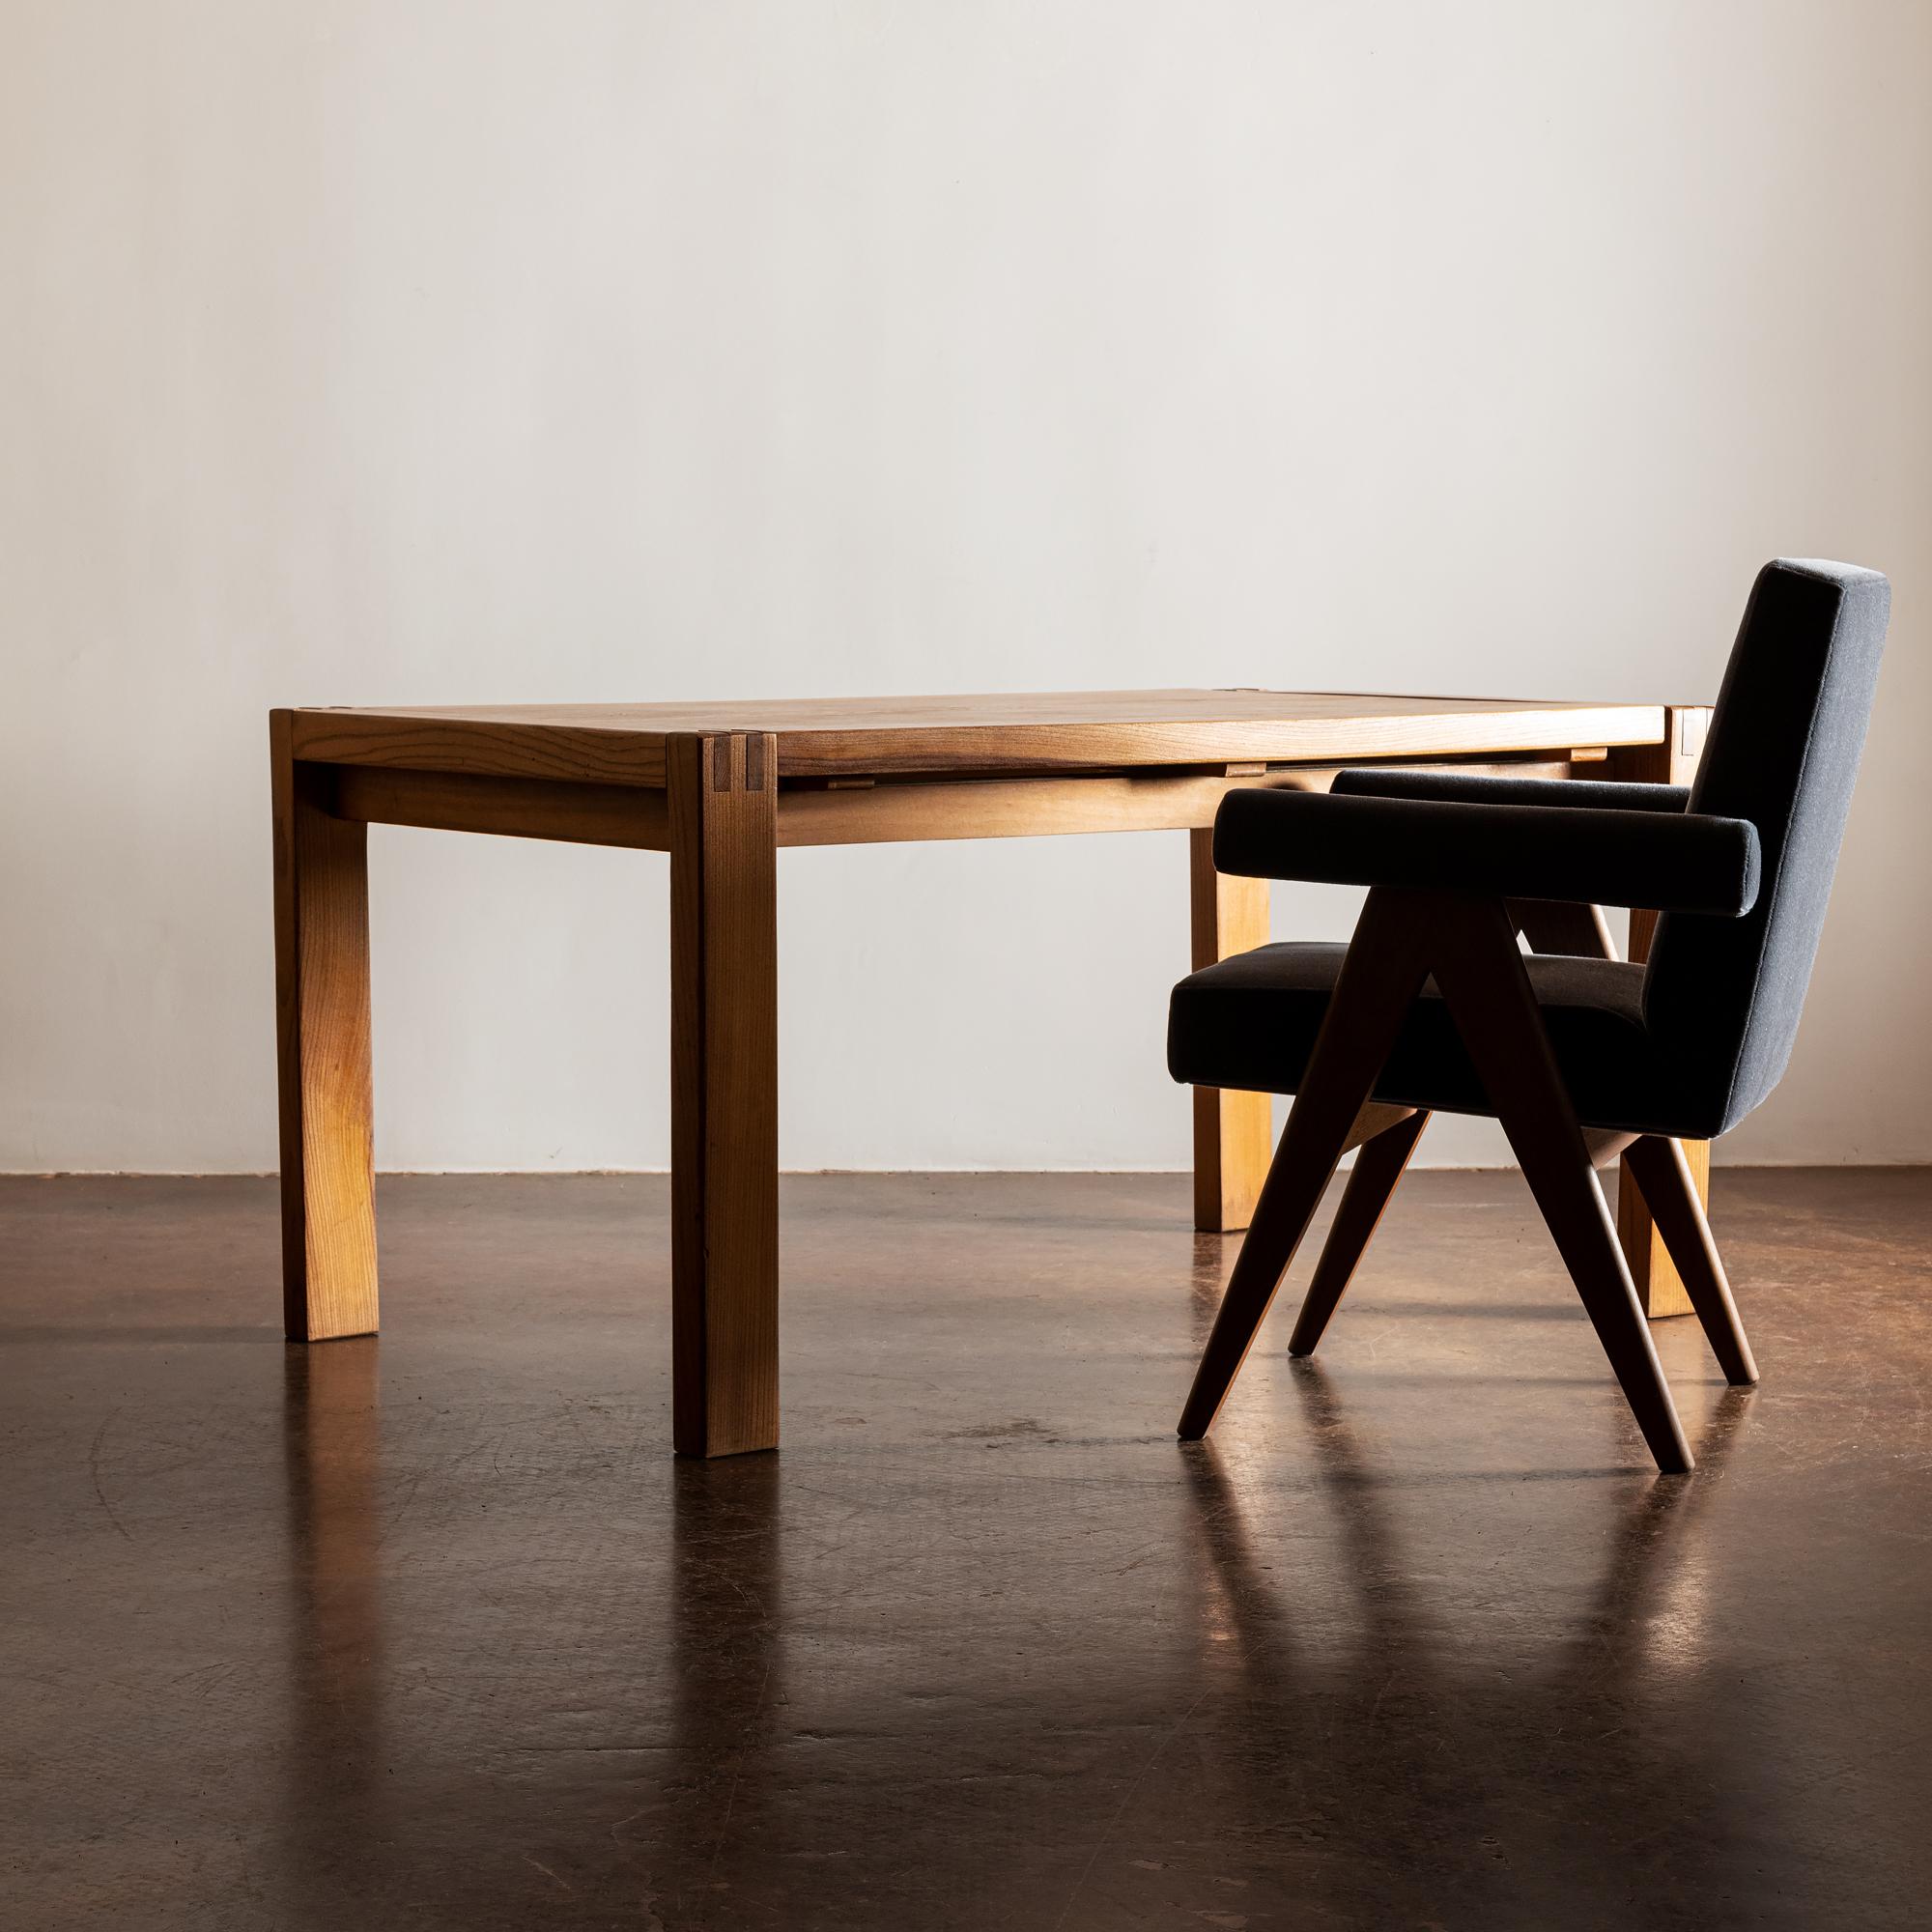 A handsome dining table in elm by Maison Regain with two extension leaves. Founder of Maison Regain was previous woodworker with Pierre Chapo. This piece has beautiful details with clear influence by their association with Chapo. France,